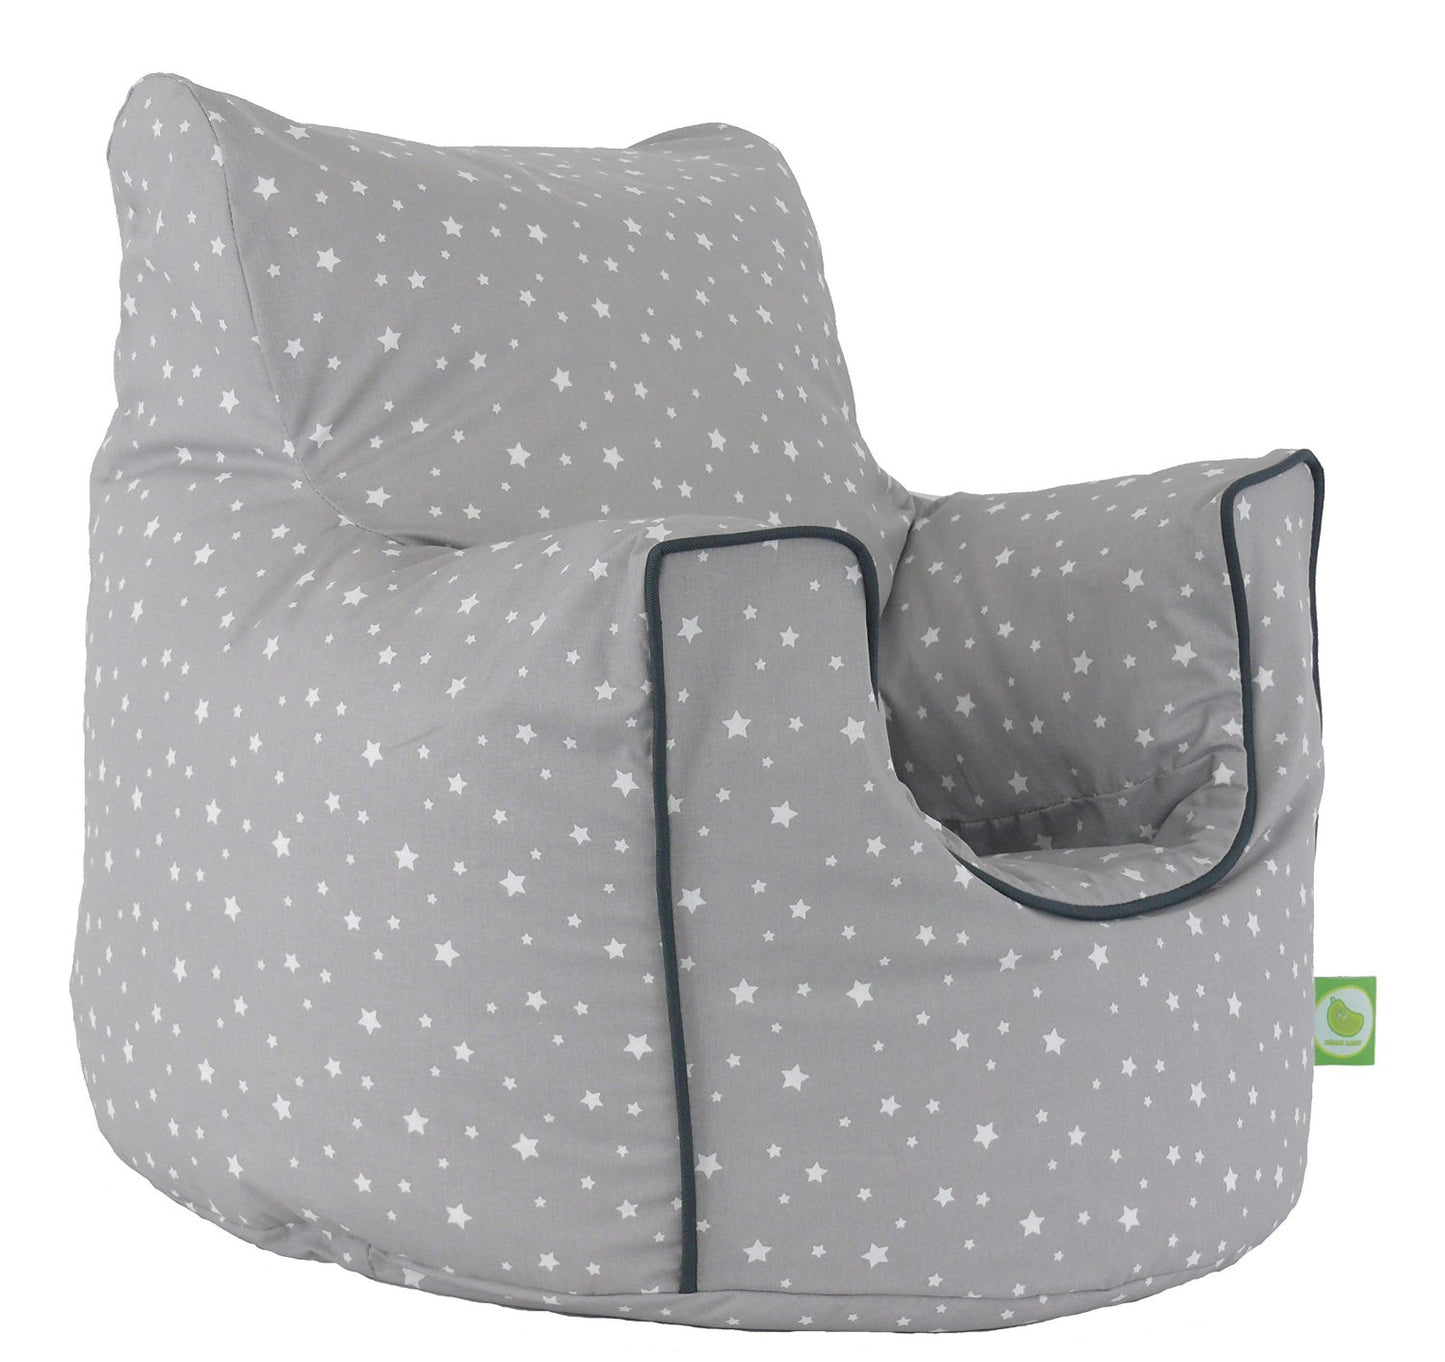 Cotton Grey Stars Bean Bag Arm Chair with Beans Child / Teen size